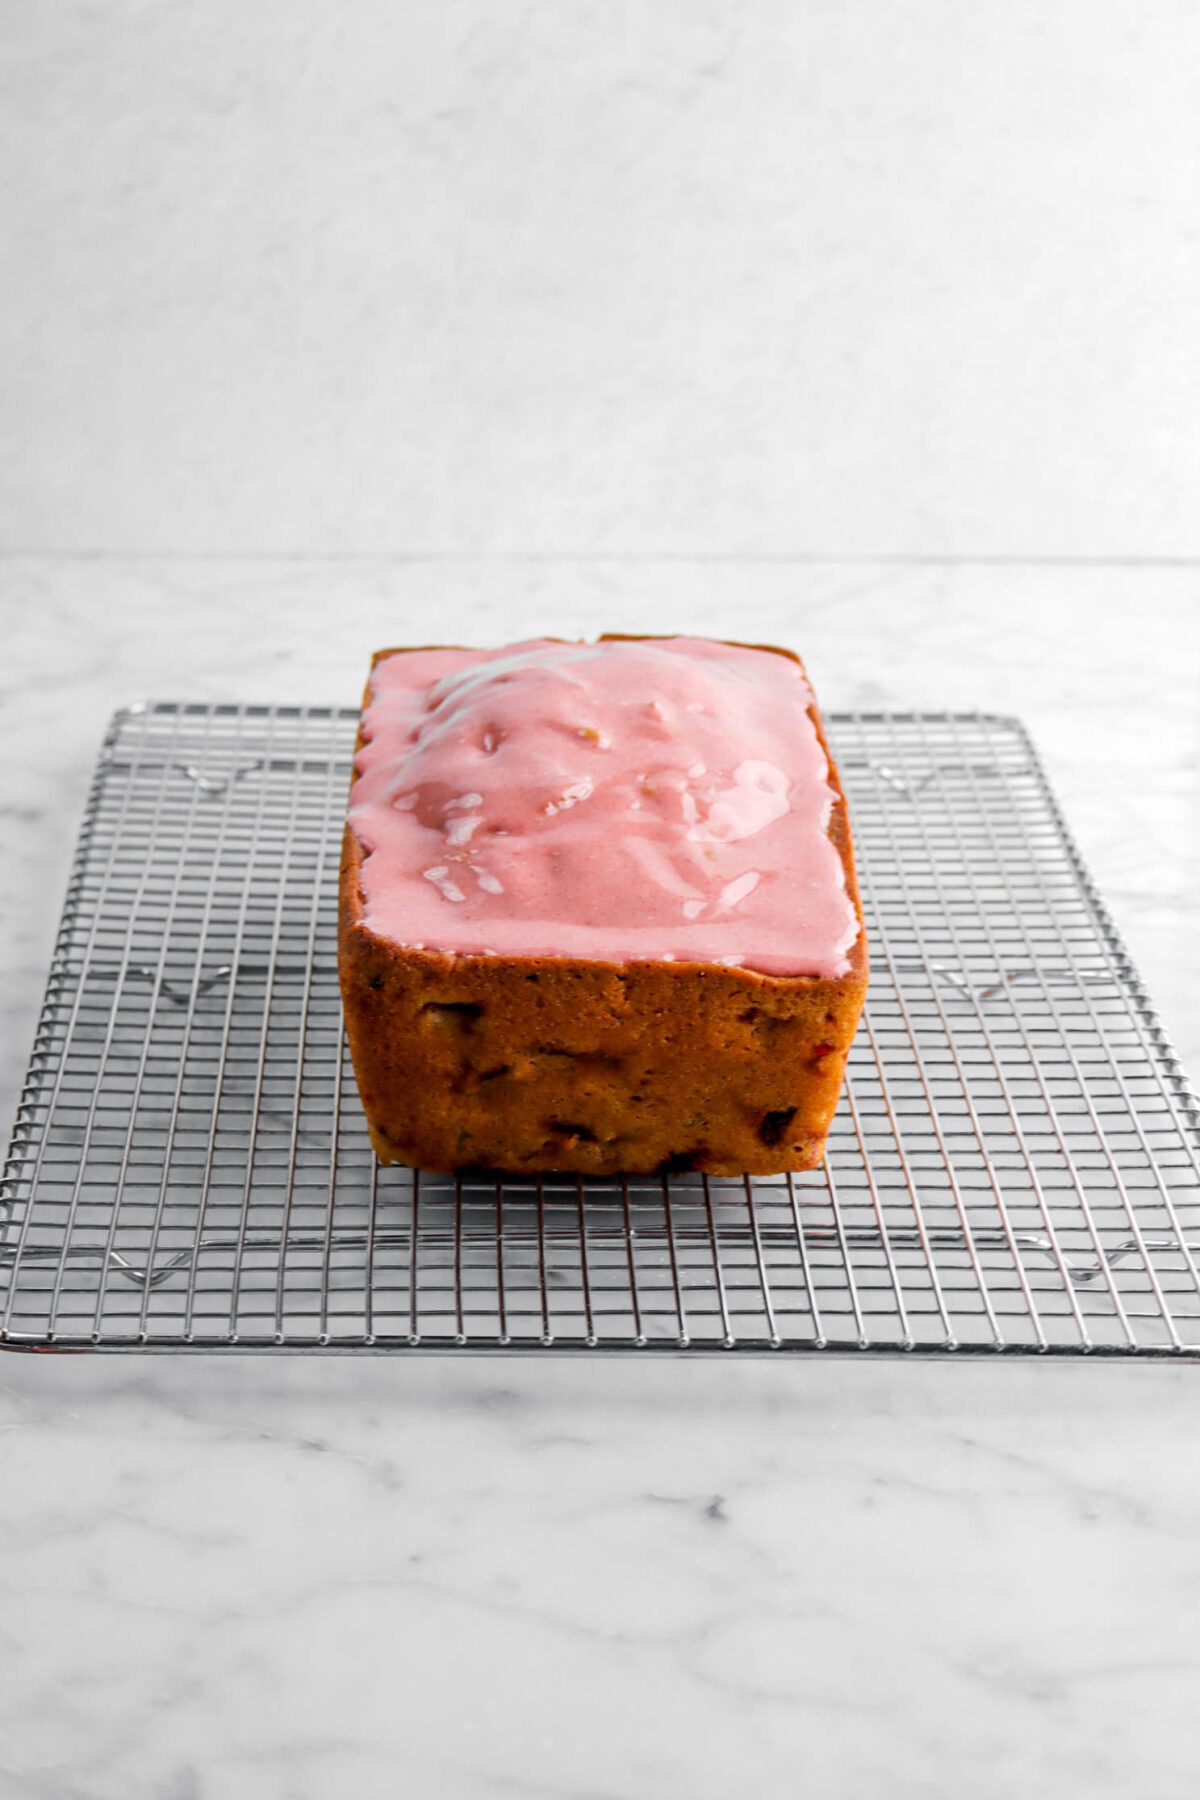 strawberry icing on top of bread loaf.